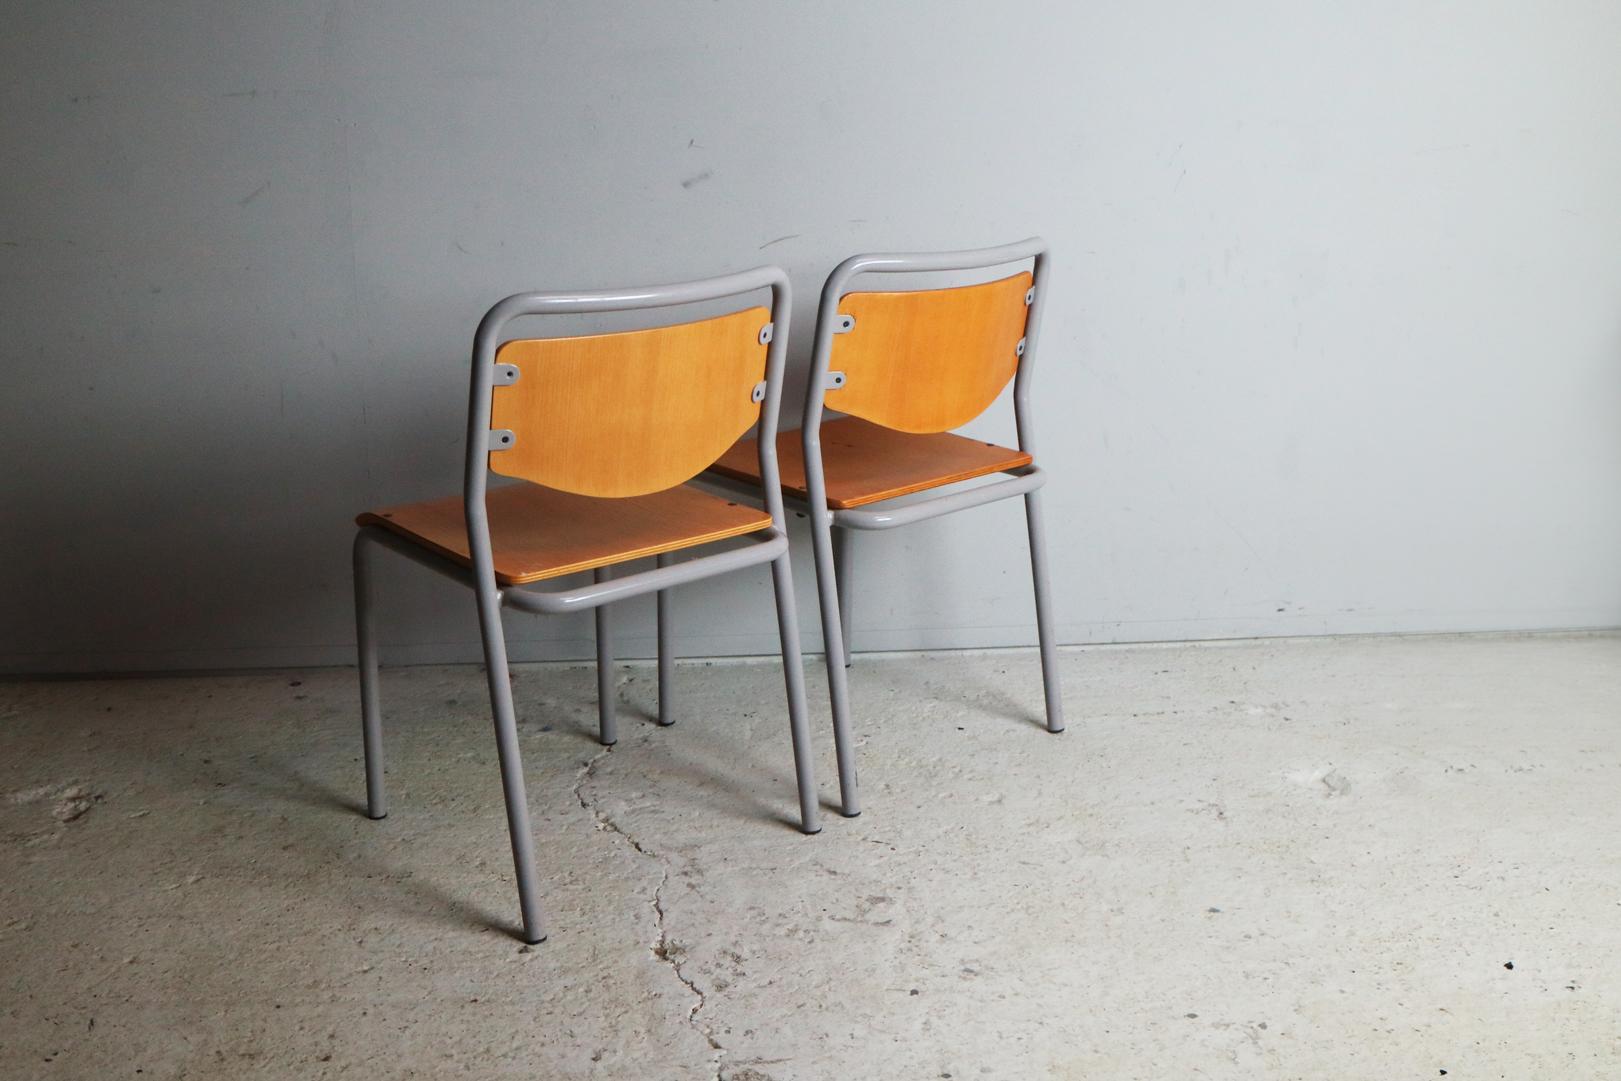 1970s Danish Industrial Stacking Chairs In Good Condition For Sale In London, GB